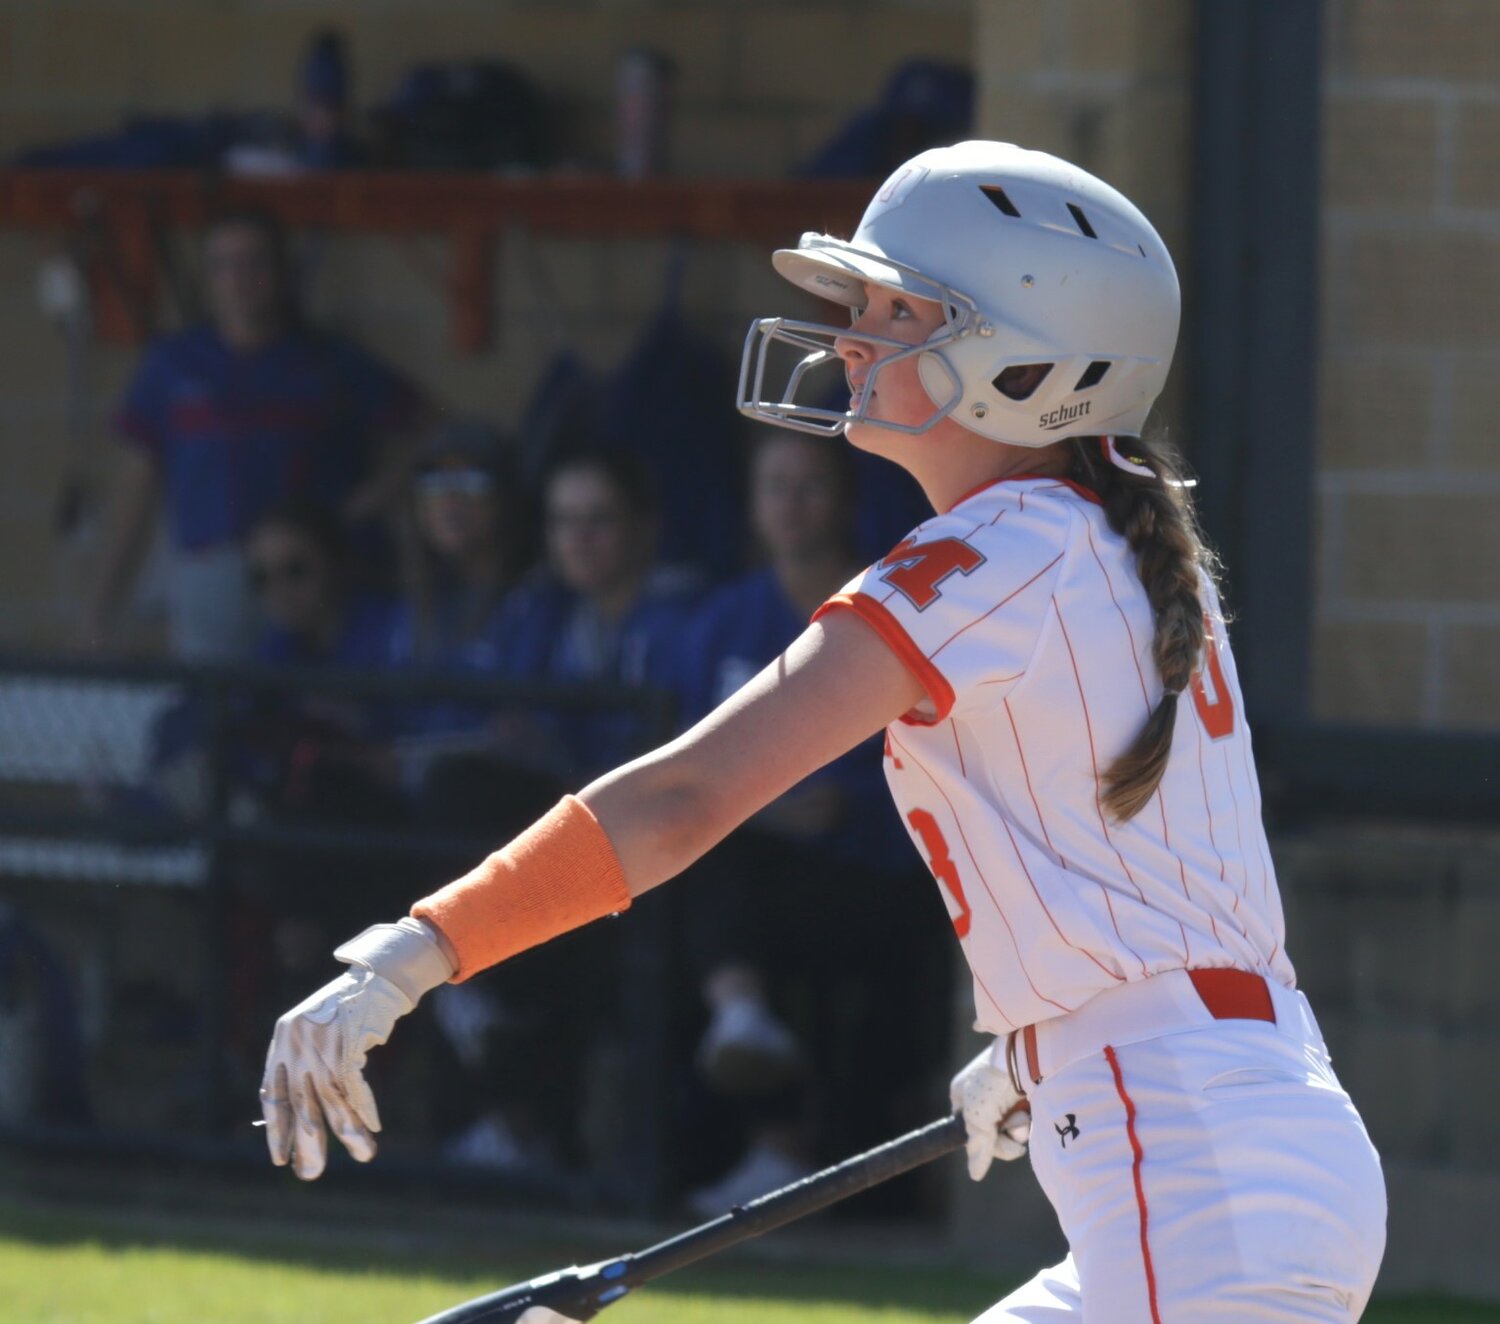 Mineola’s Gracie Lindley sparked the Lady Jackets with her base hit in the bottom of the third in their win over Quitman.